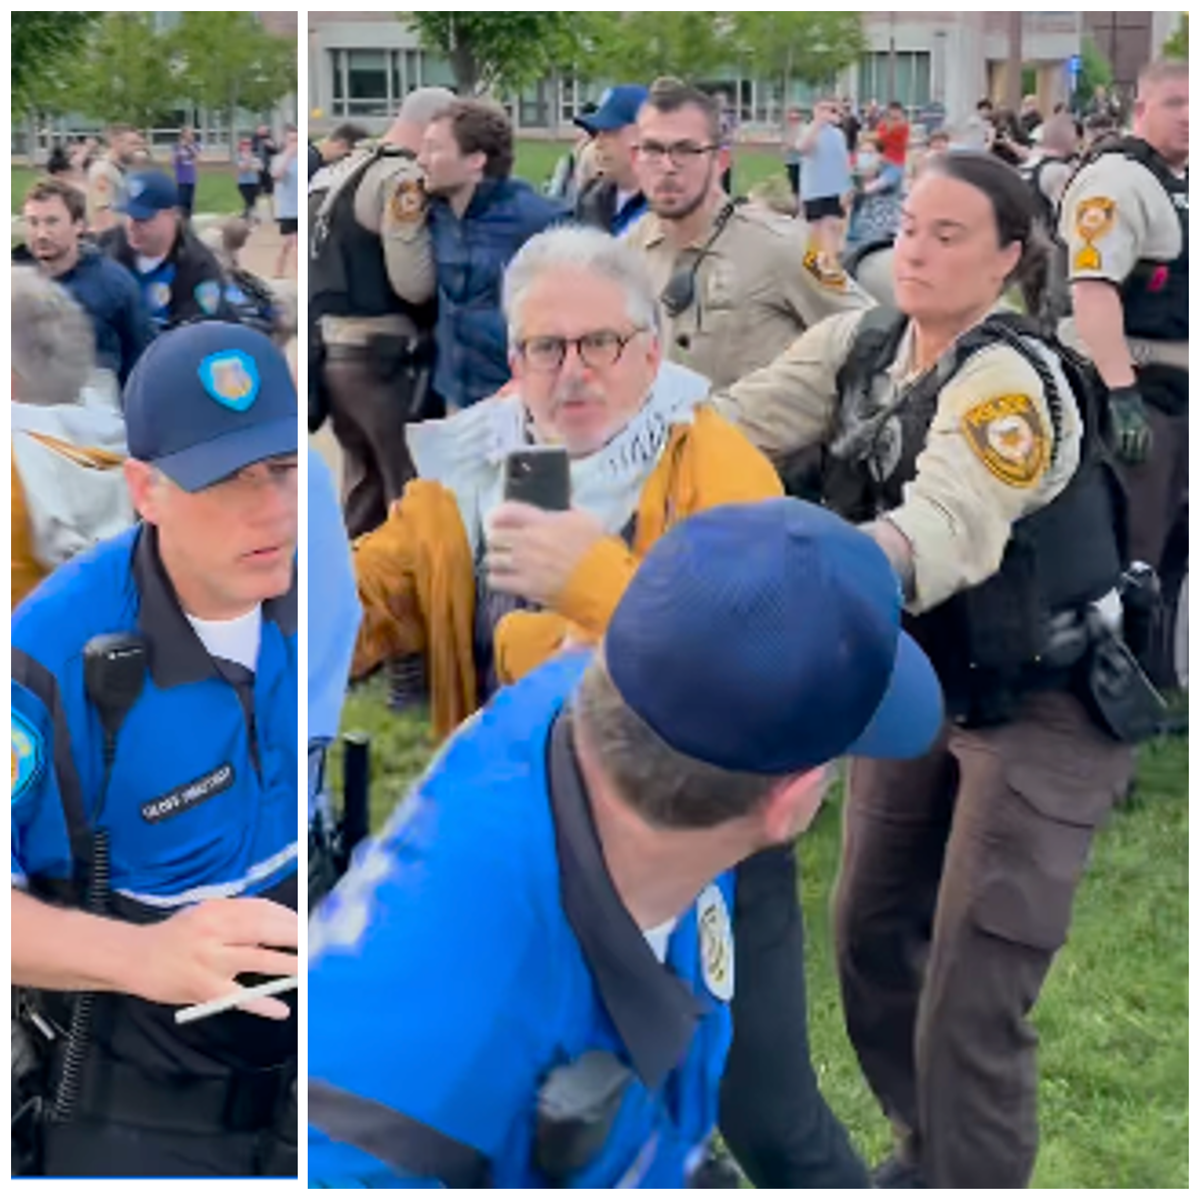 A video posted to X shows the arrest of Southern Illinois University Edwardsville professor Steve Tamari at Wash U on Saturday, April 27.